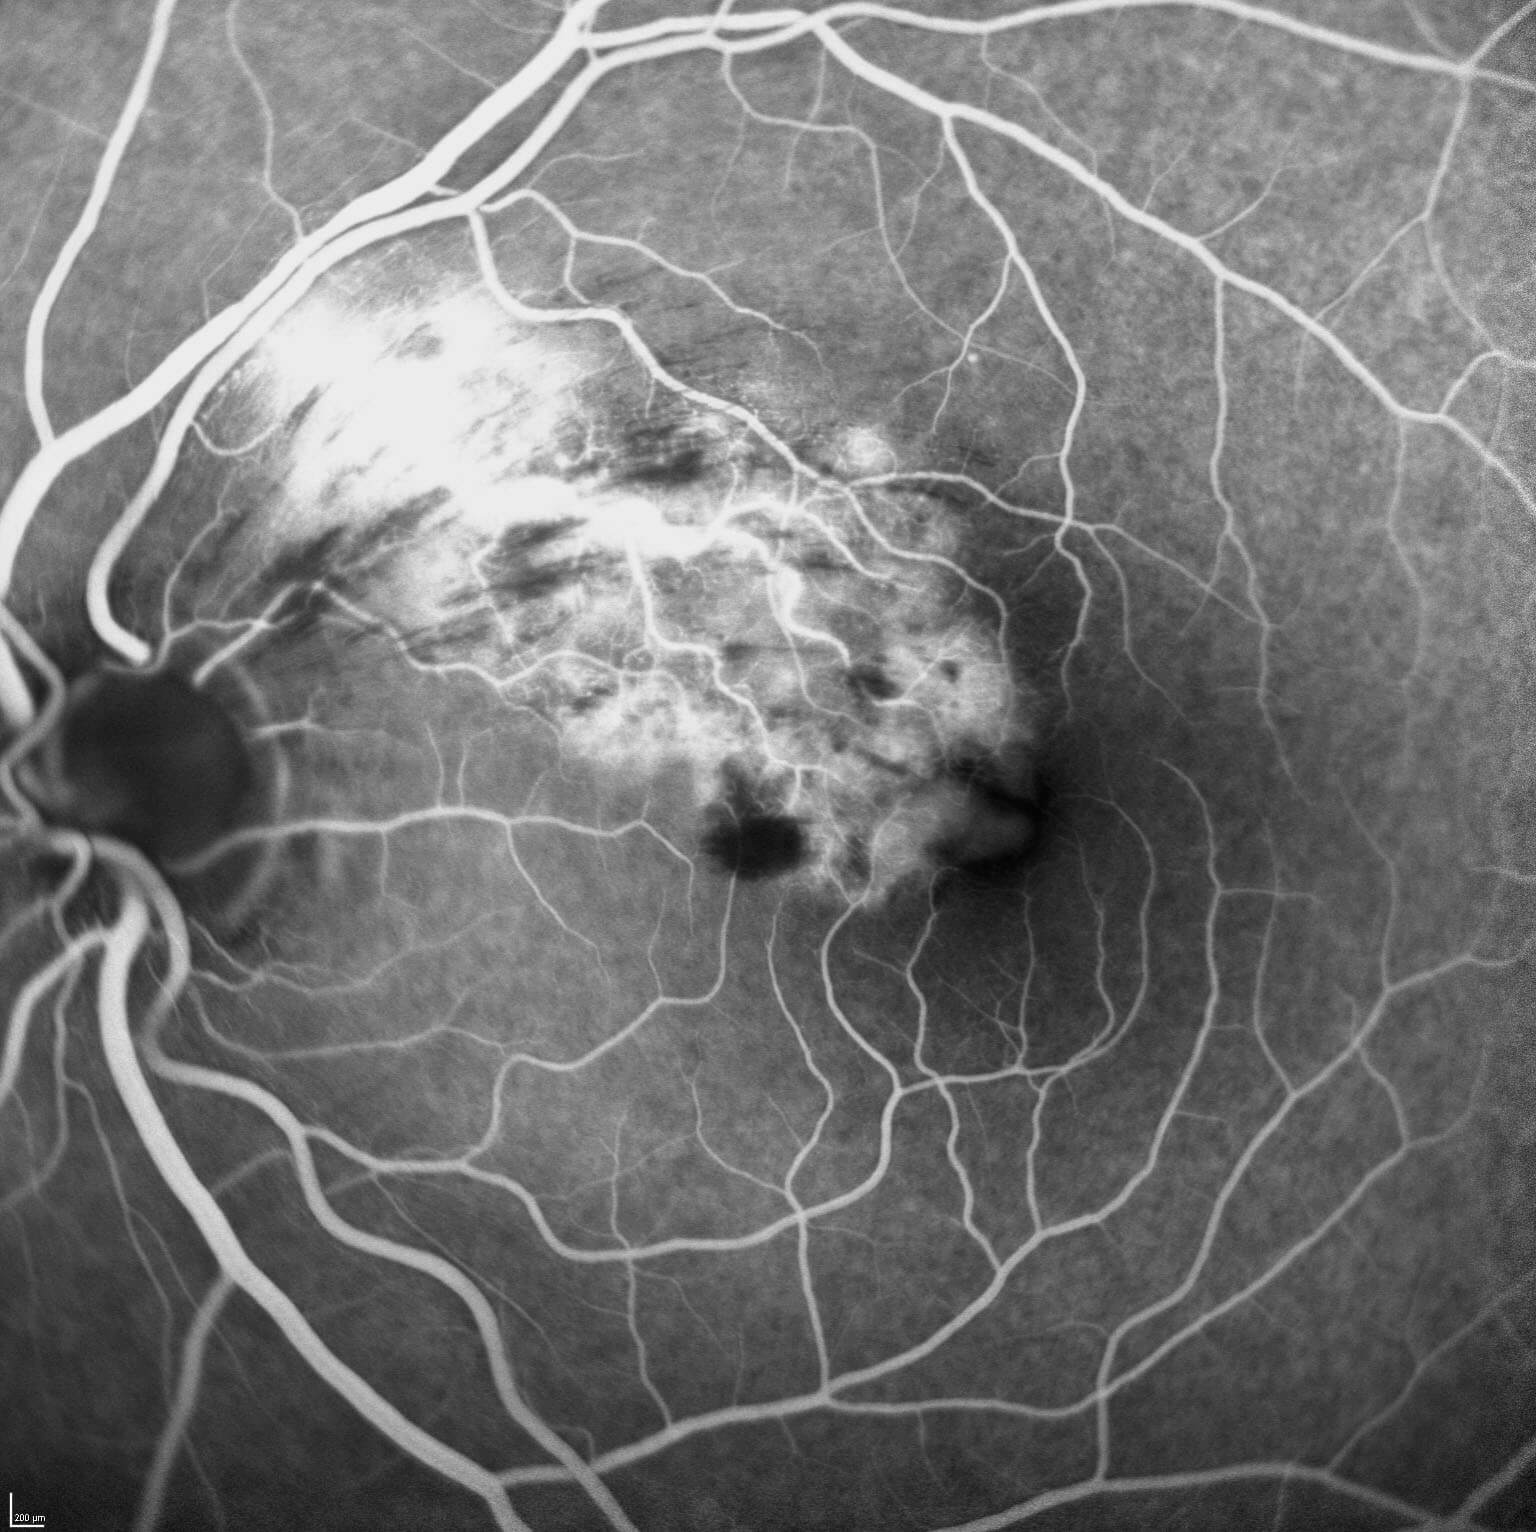 Late phase FFA of the left eye demonstrates leak and angiographic cystoid macular oedema.